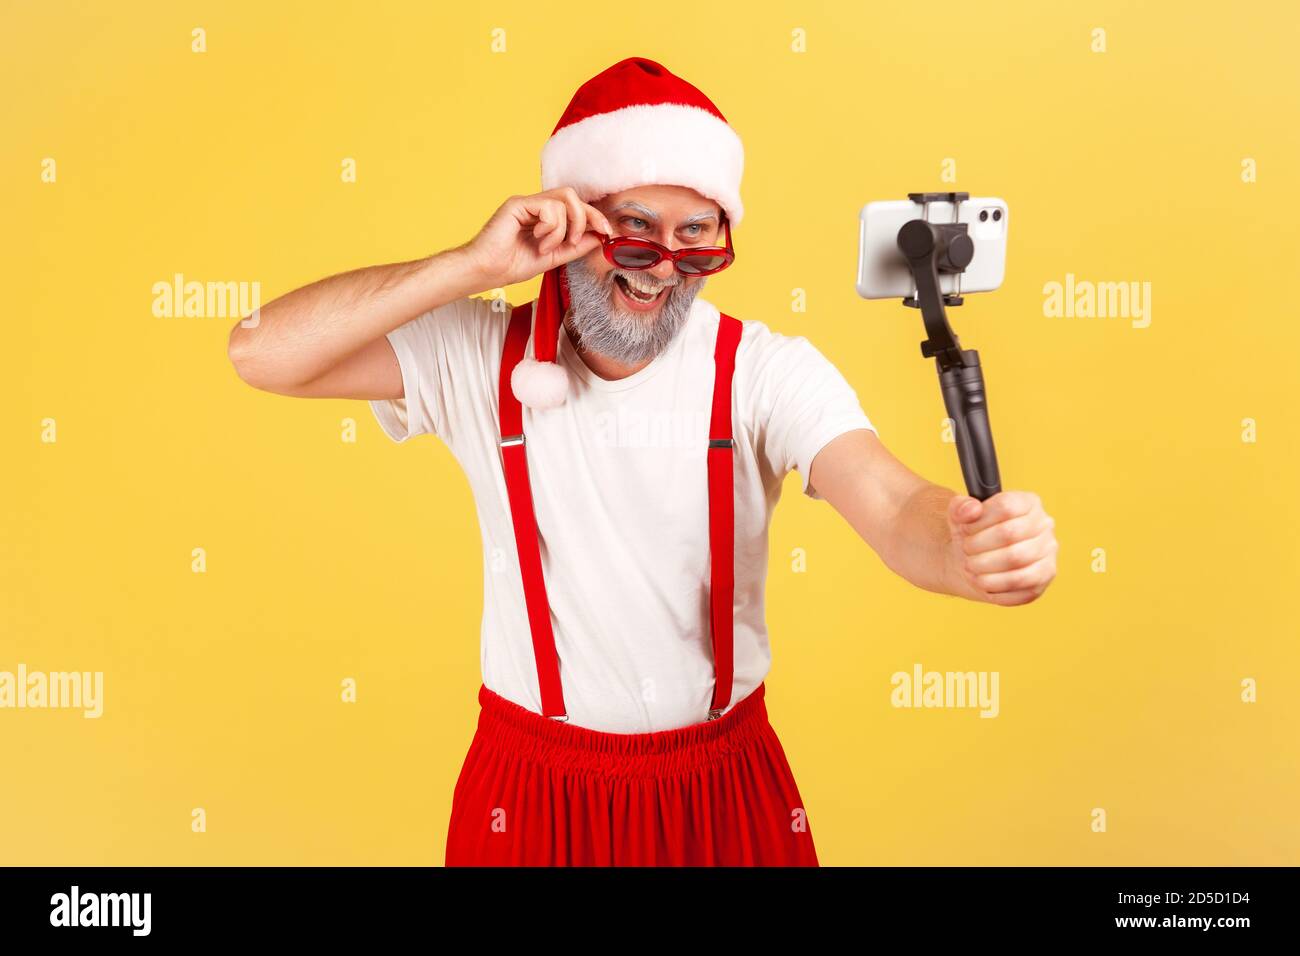 Handsome gray bearded man in santa claus costume holding smartphone on stick posing to make photo or record video, blogging. Indoor studio shot isolat Stock Photo